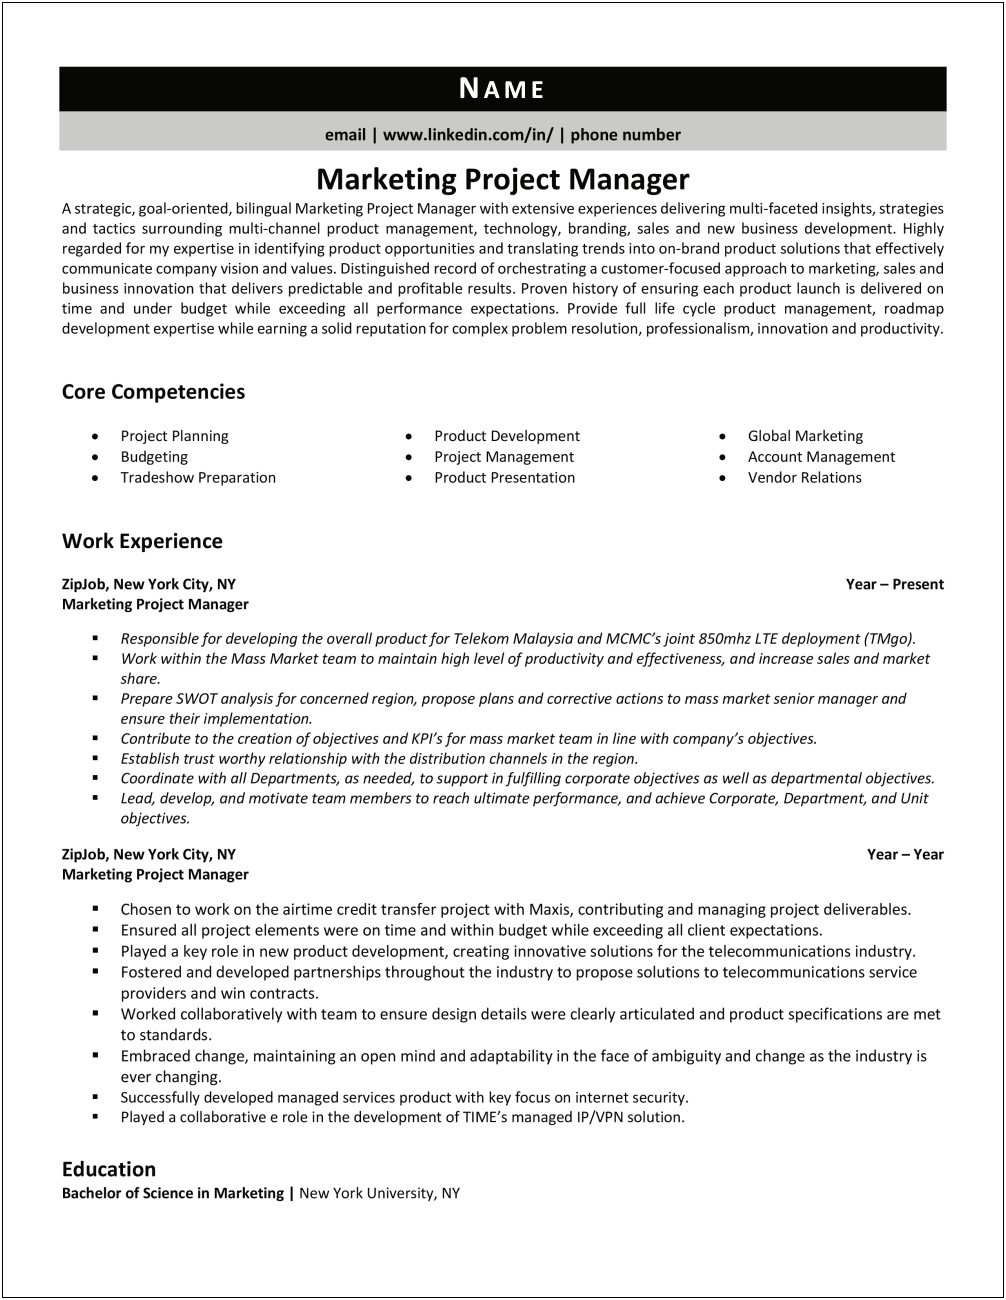 Marketing Project Manager Resume Examples